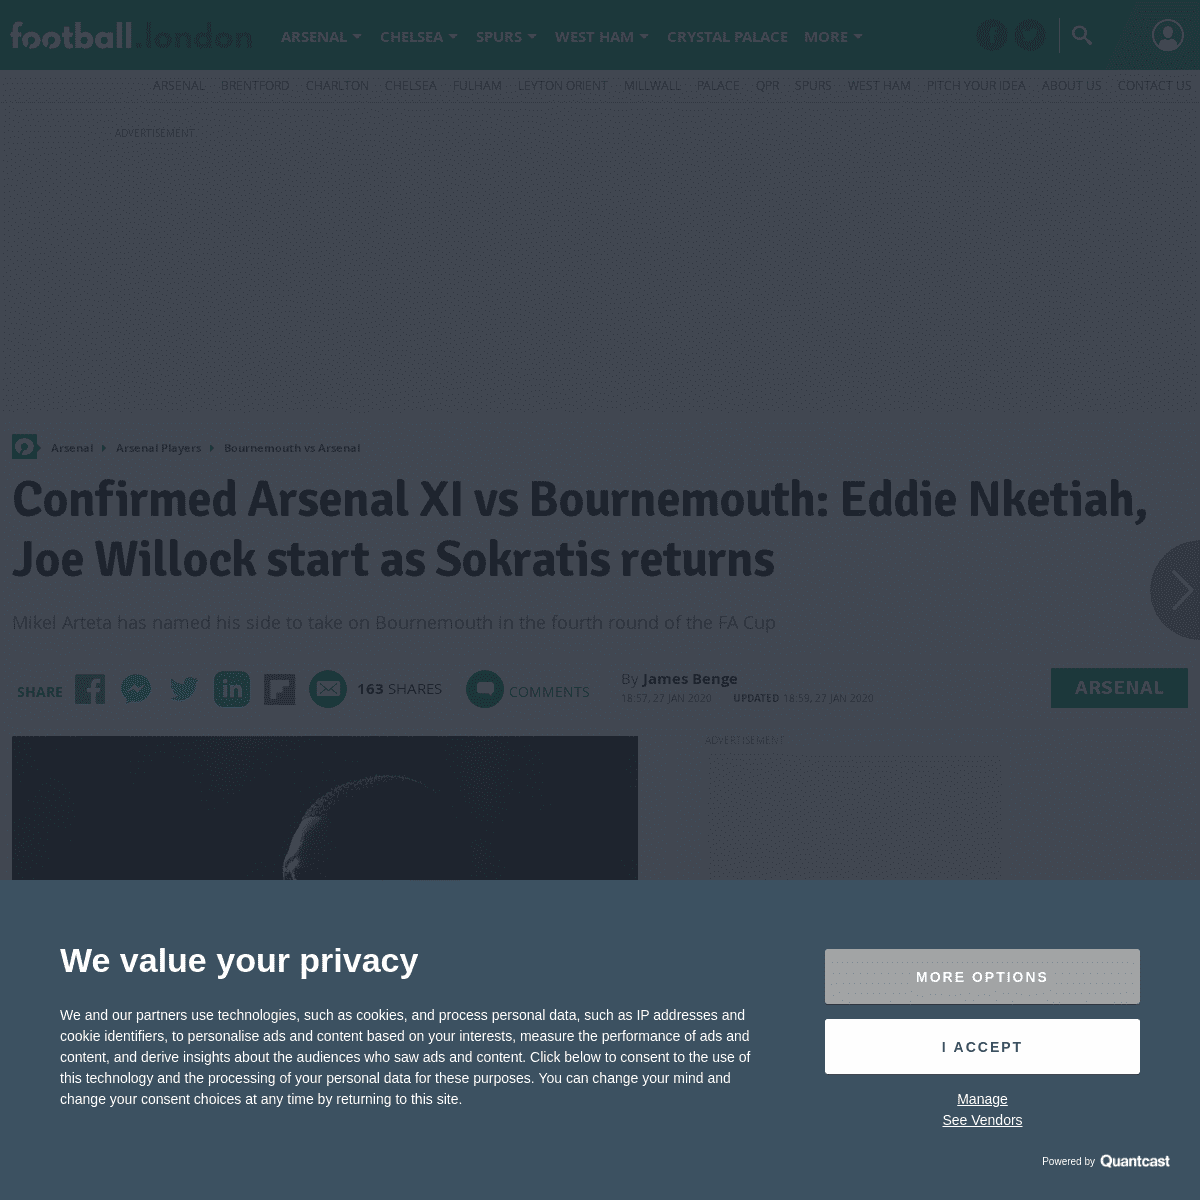 A complete backup of www.football.london/arsenal-fc/players/confirmed-arsenal-xi-vs-bournemouth-17641137